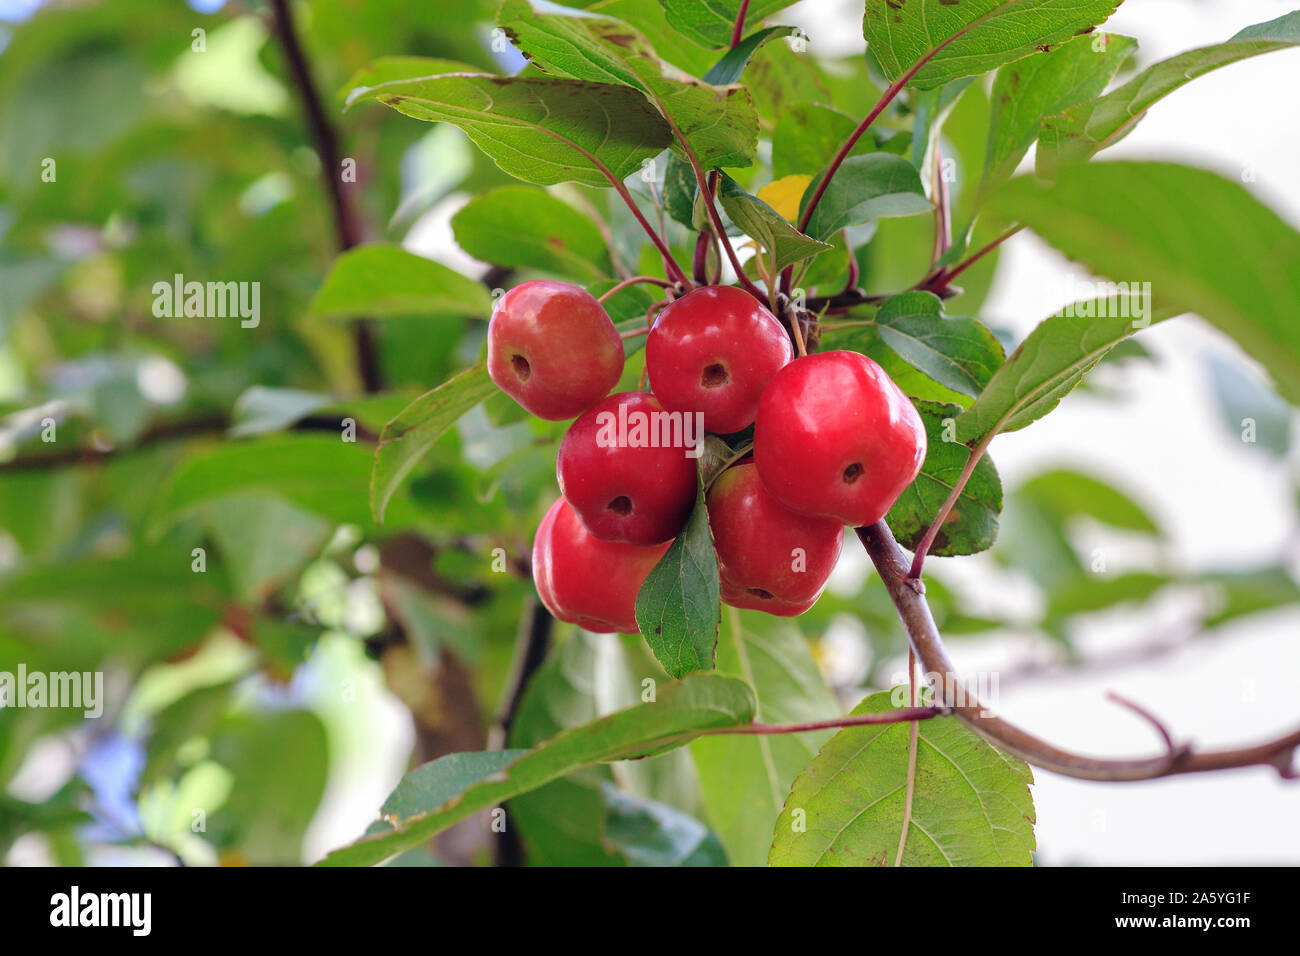 Little red fruits on Plumleaf crab apple tree. Malus prunifolia or Chinese crabapple apples Stock Photo